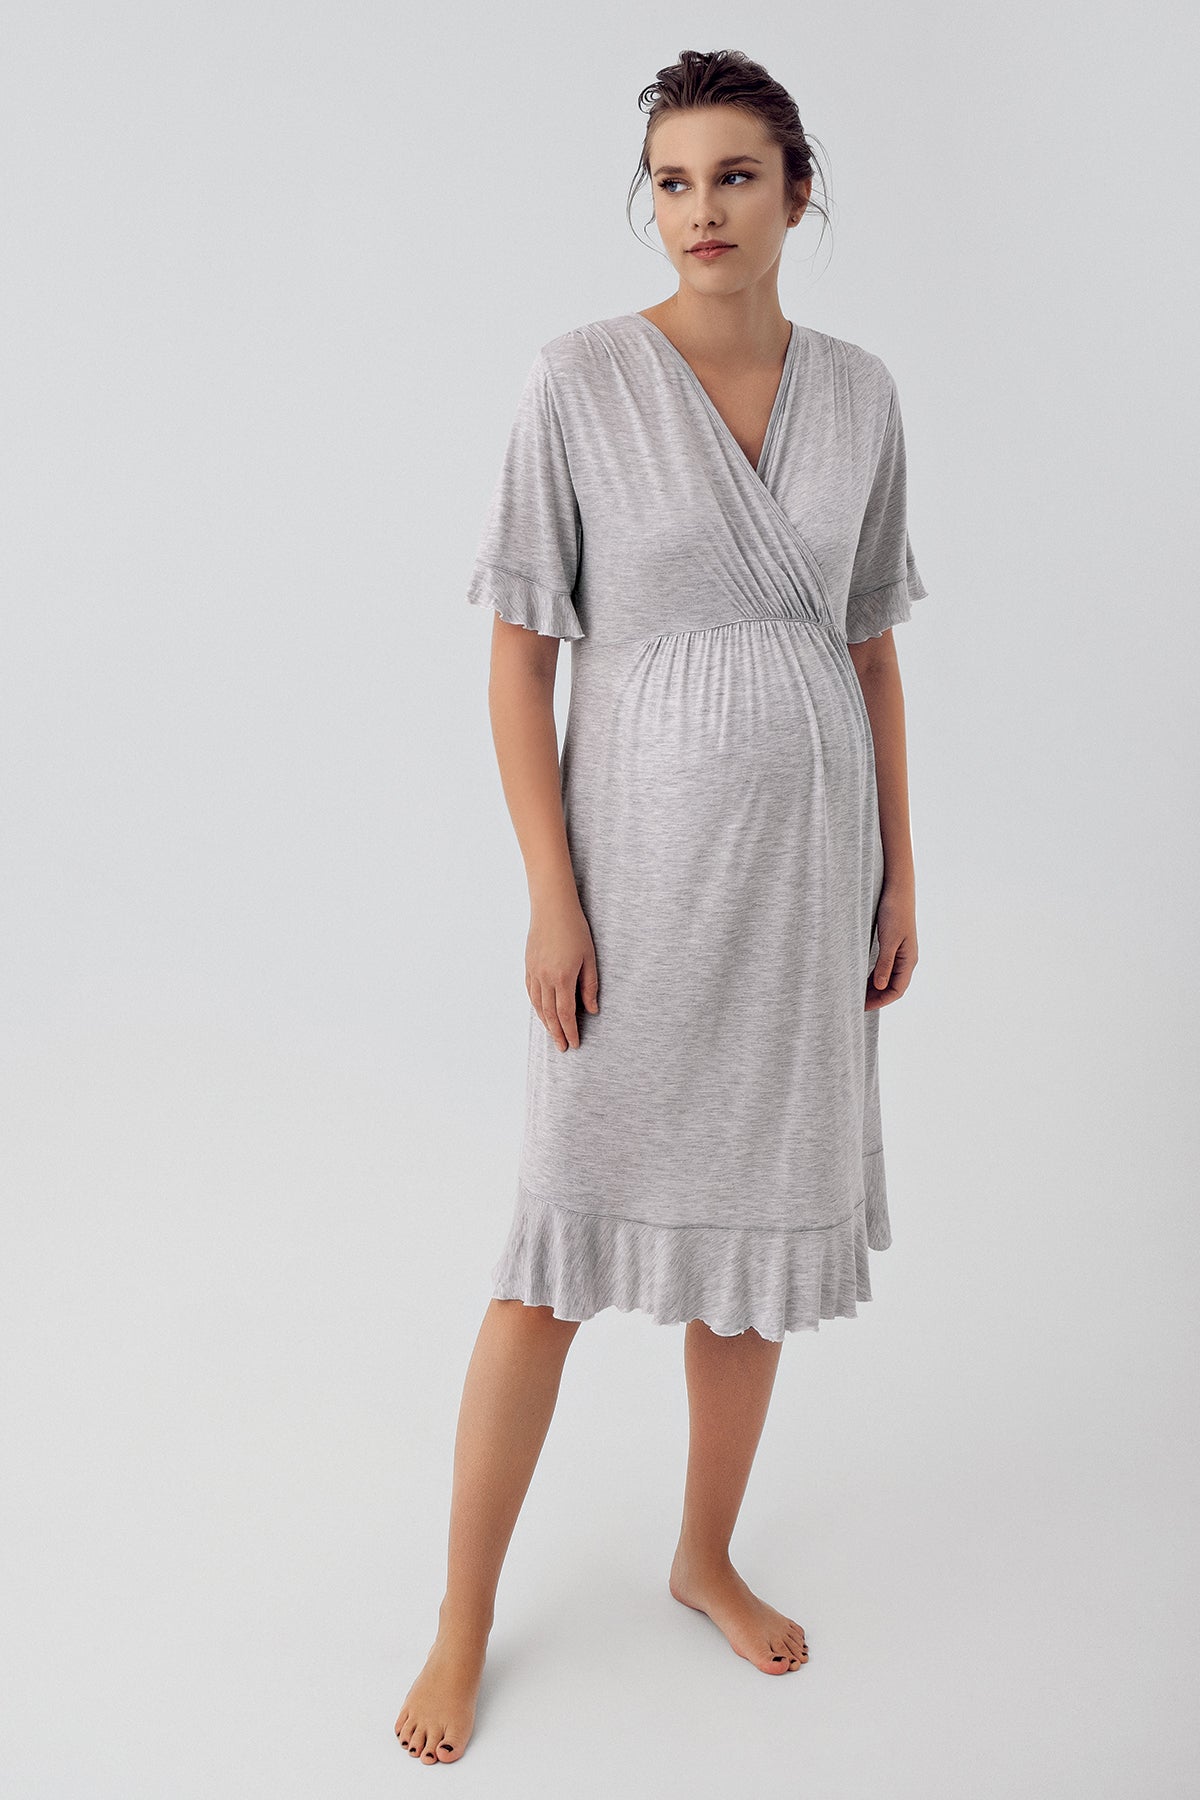 Shopymommy 2259 Lace Collar Maternity & Nursing Nightgown With Flywhee